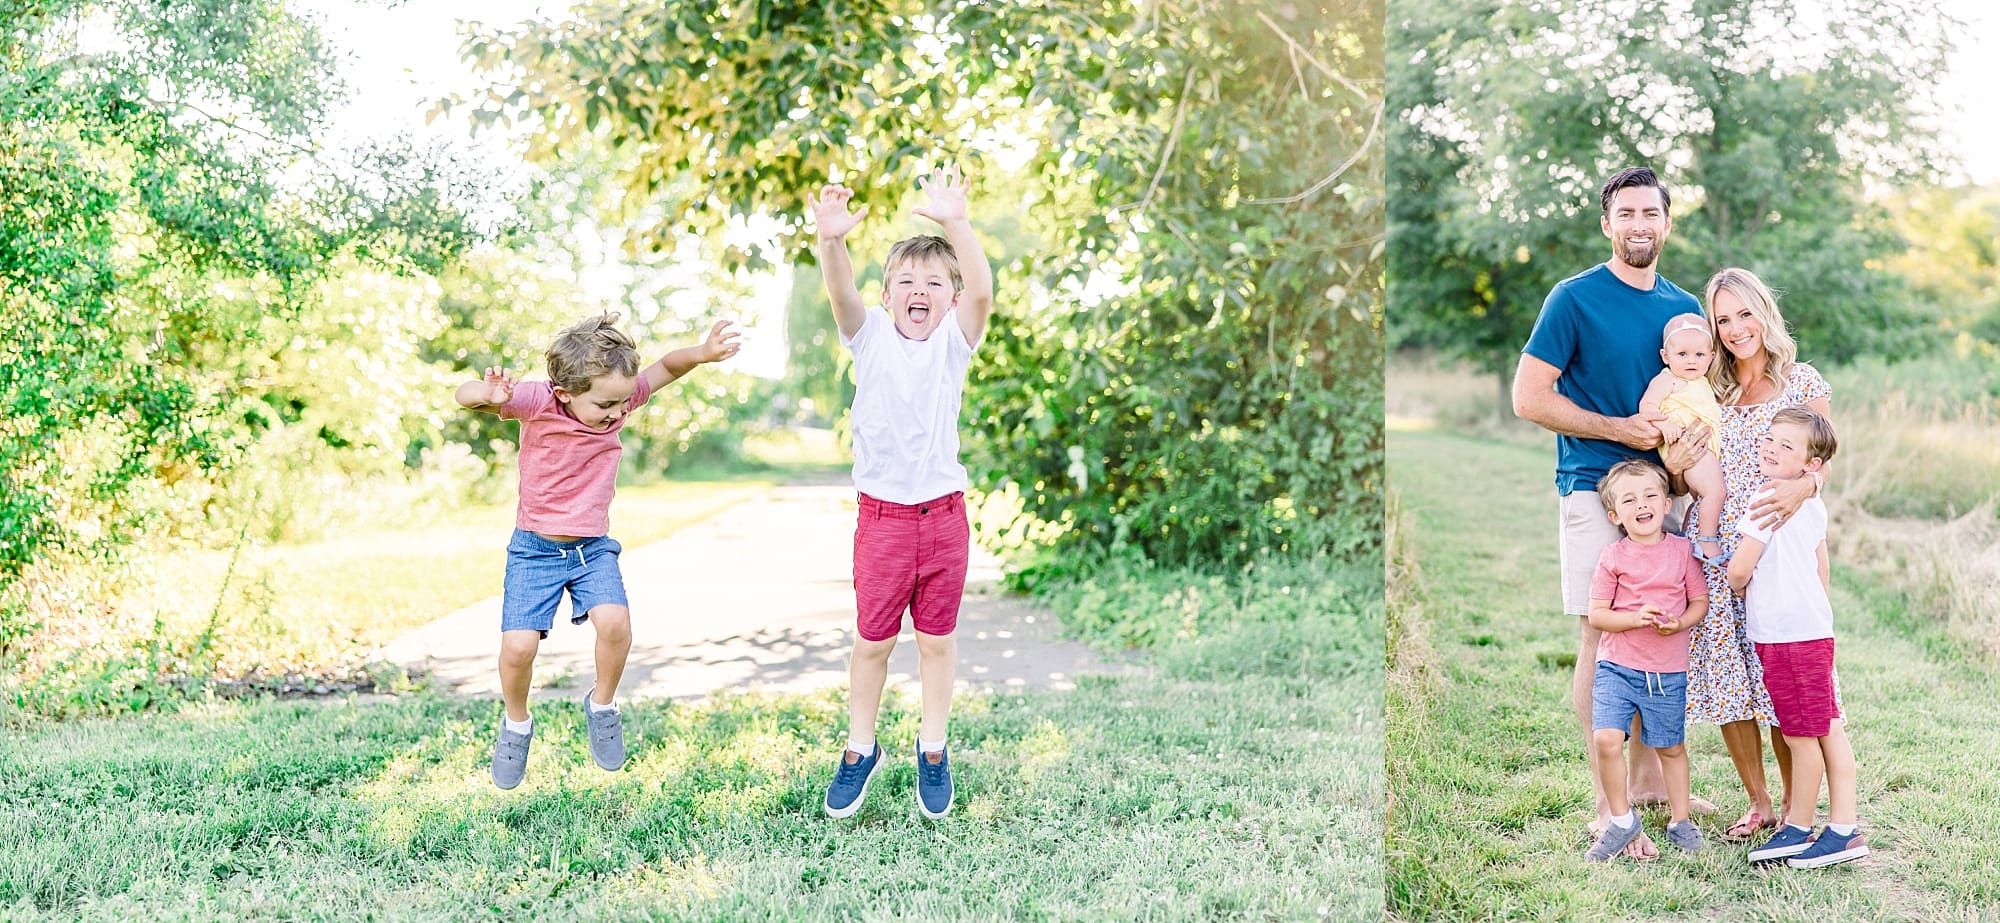 Outdoor family portraits by Melissa Arlena Photography